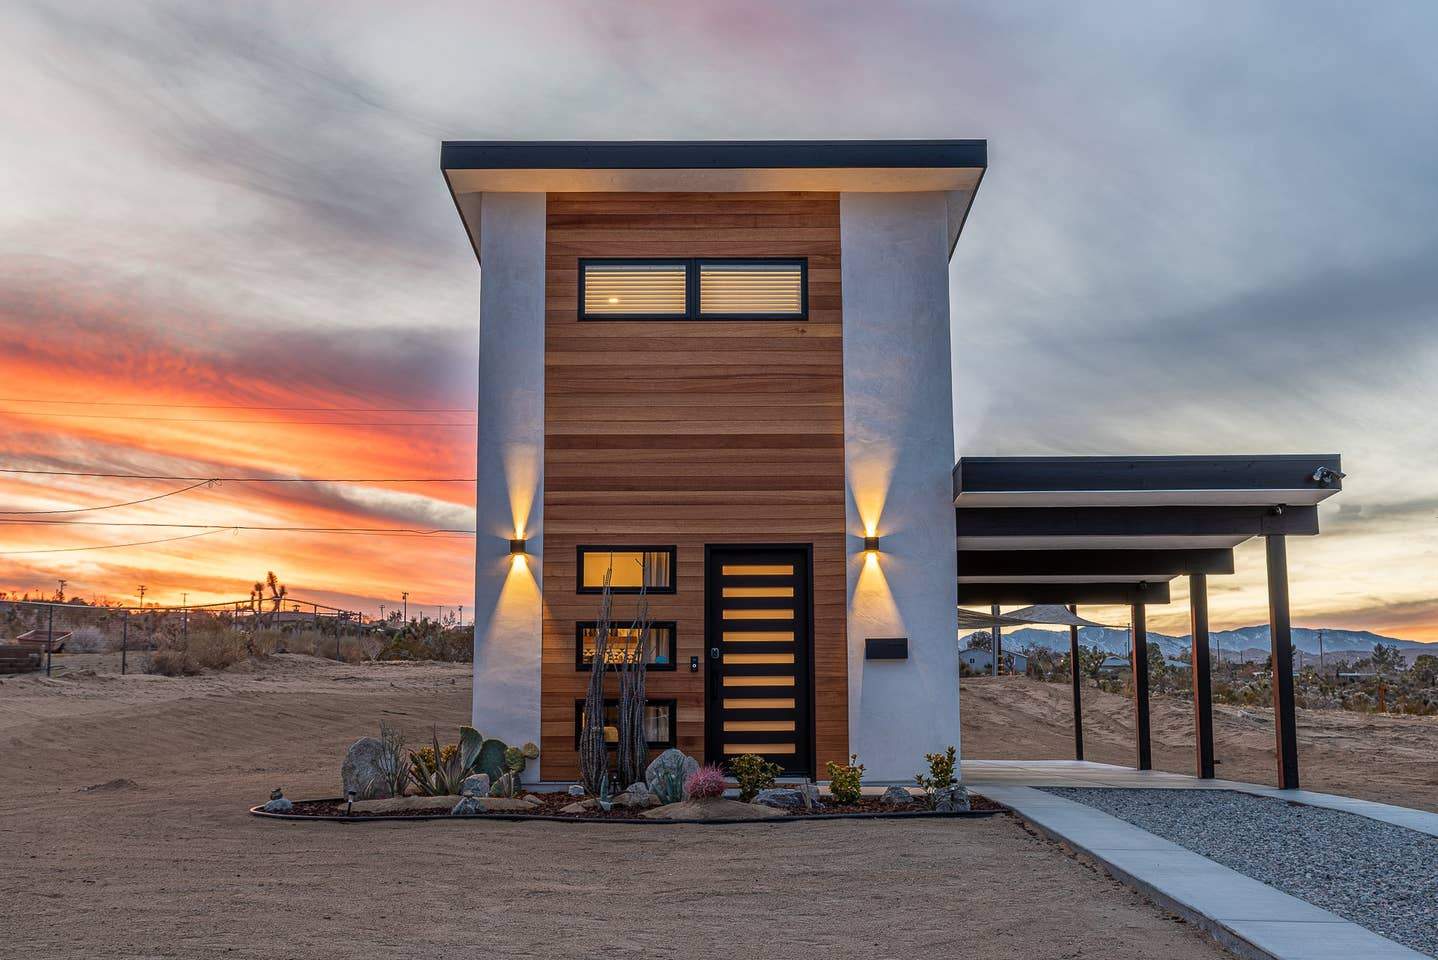 20 Tiny Houses in California You Can Rent on Airbnb in 2021!